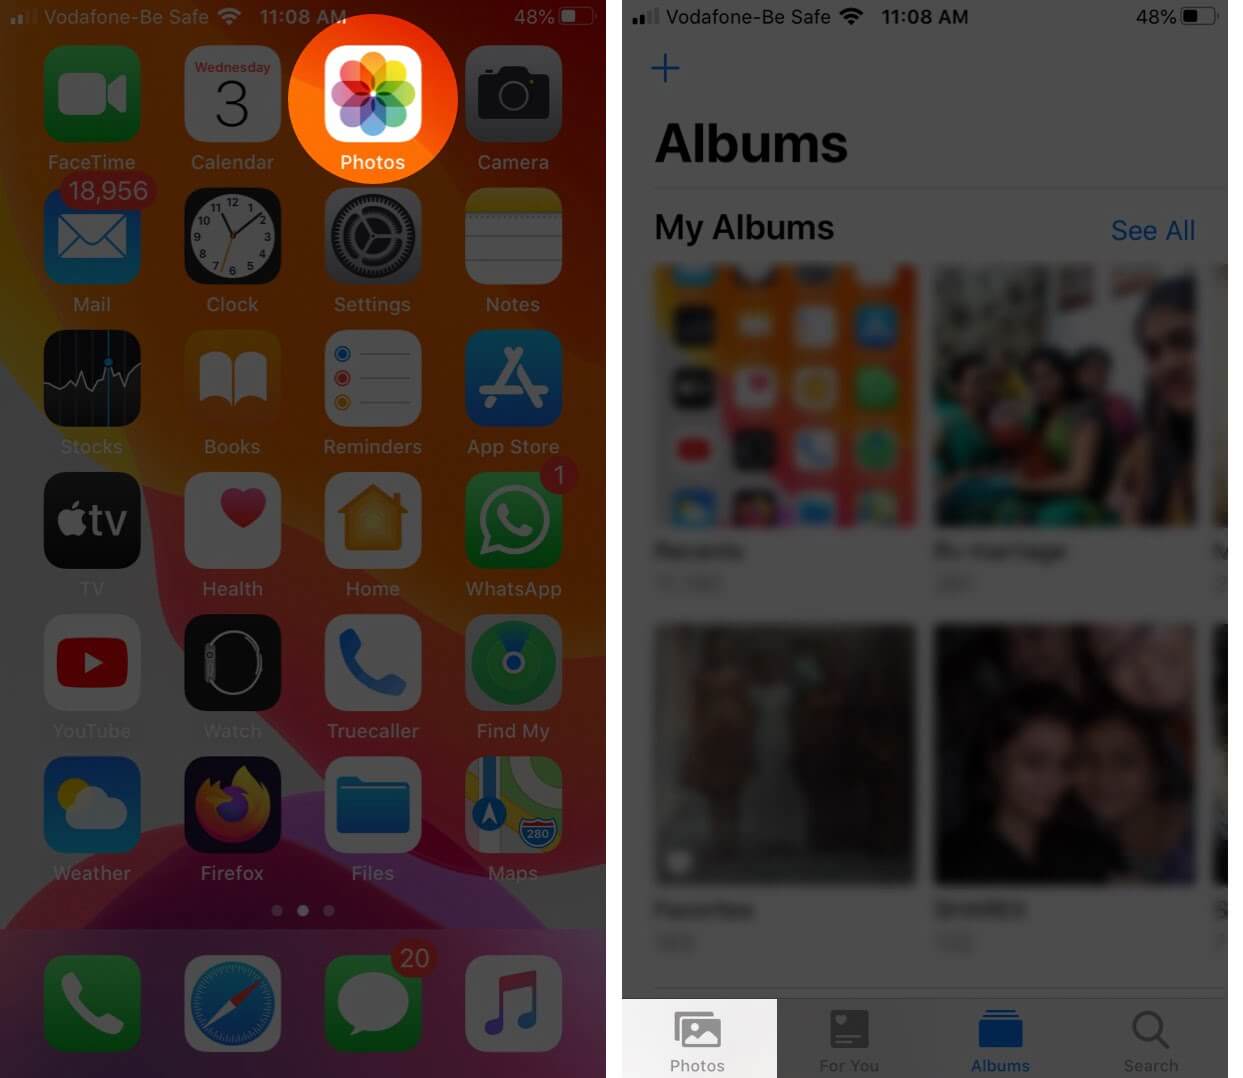 Open Photos App and Tap on Photos Tab on iPhone